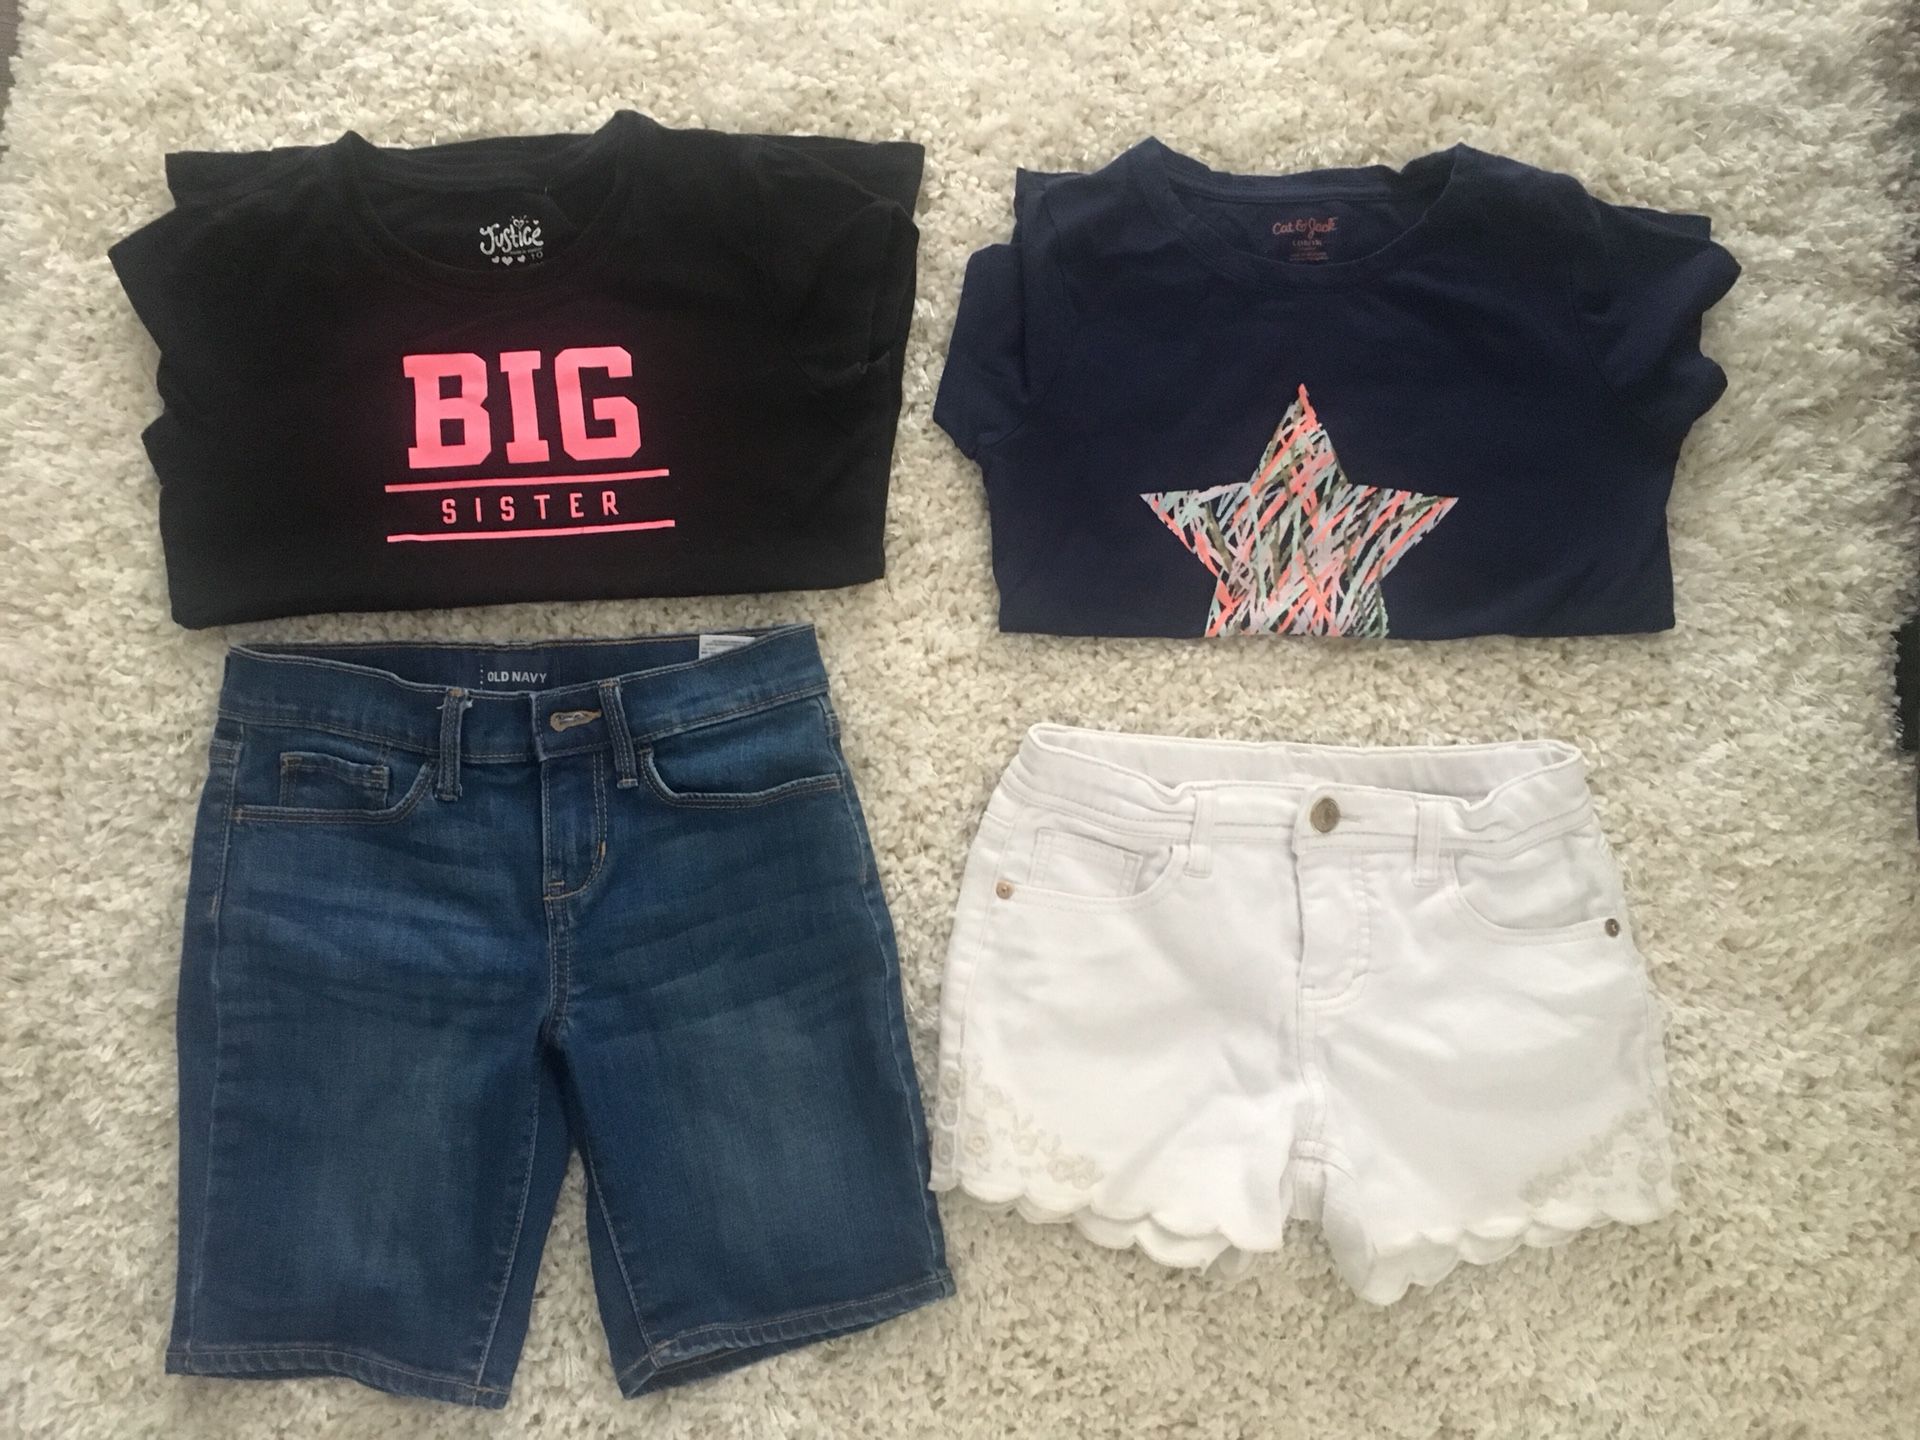 Girls back to school outfits- size 10